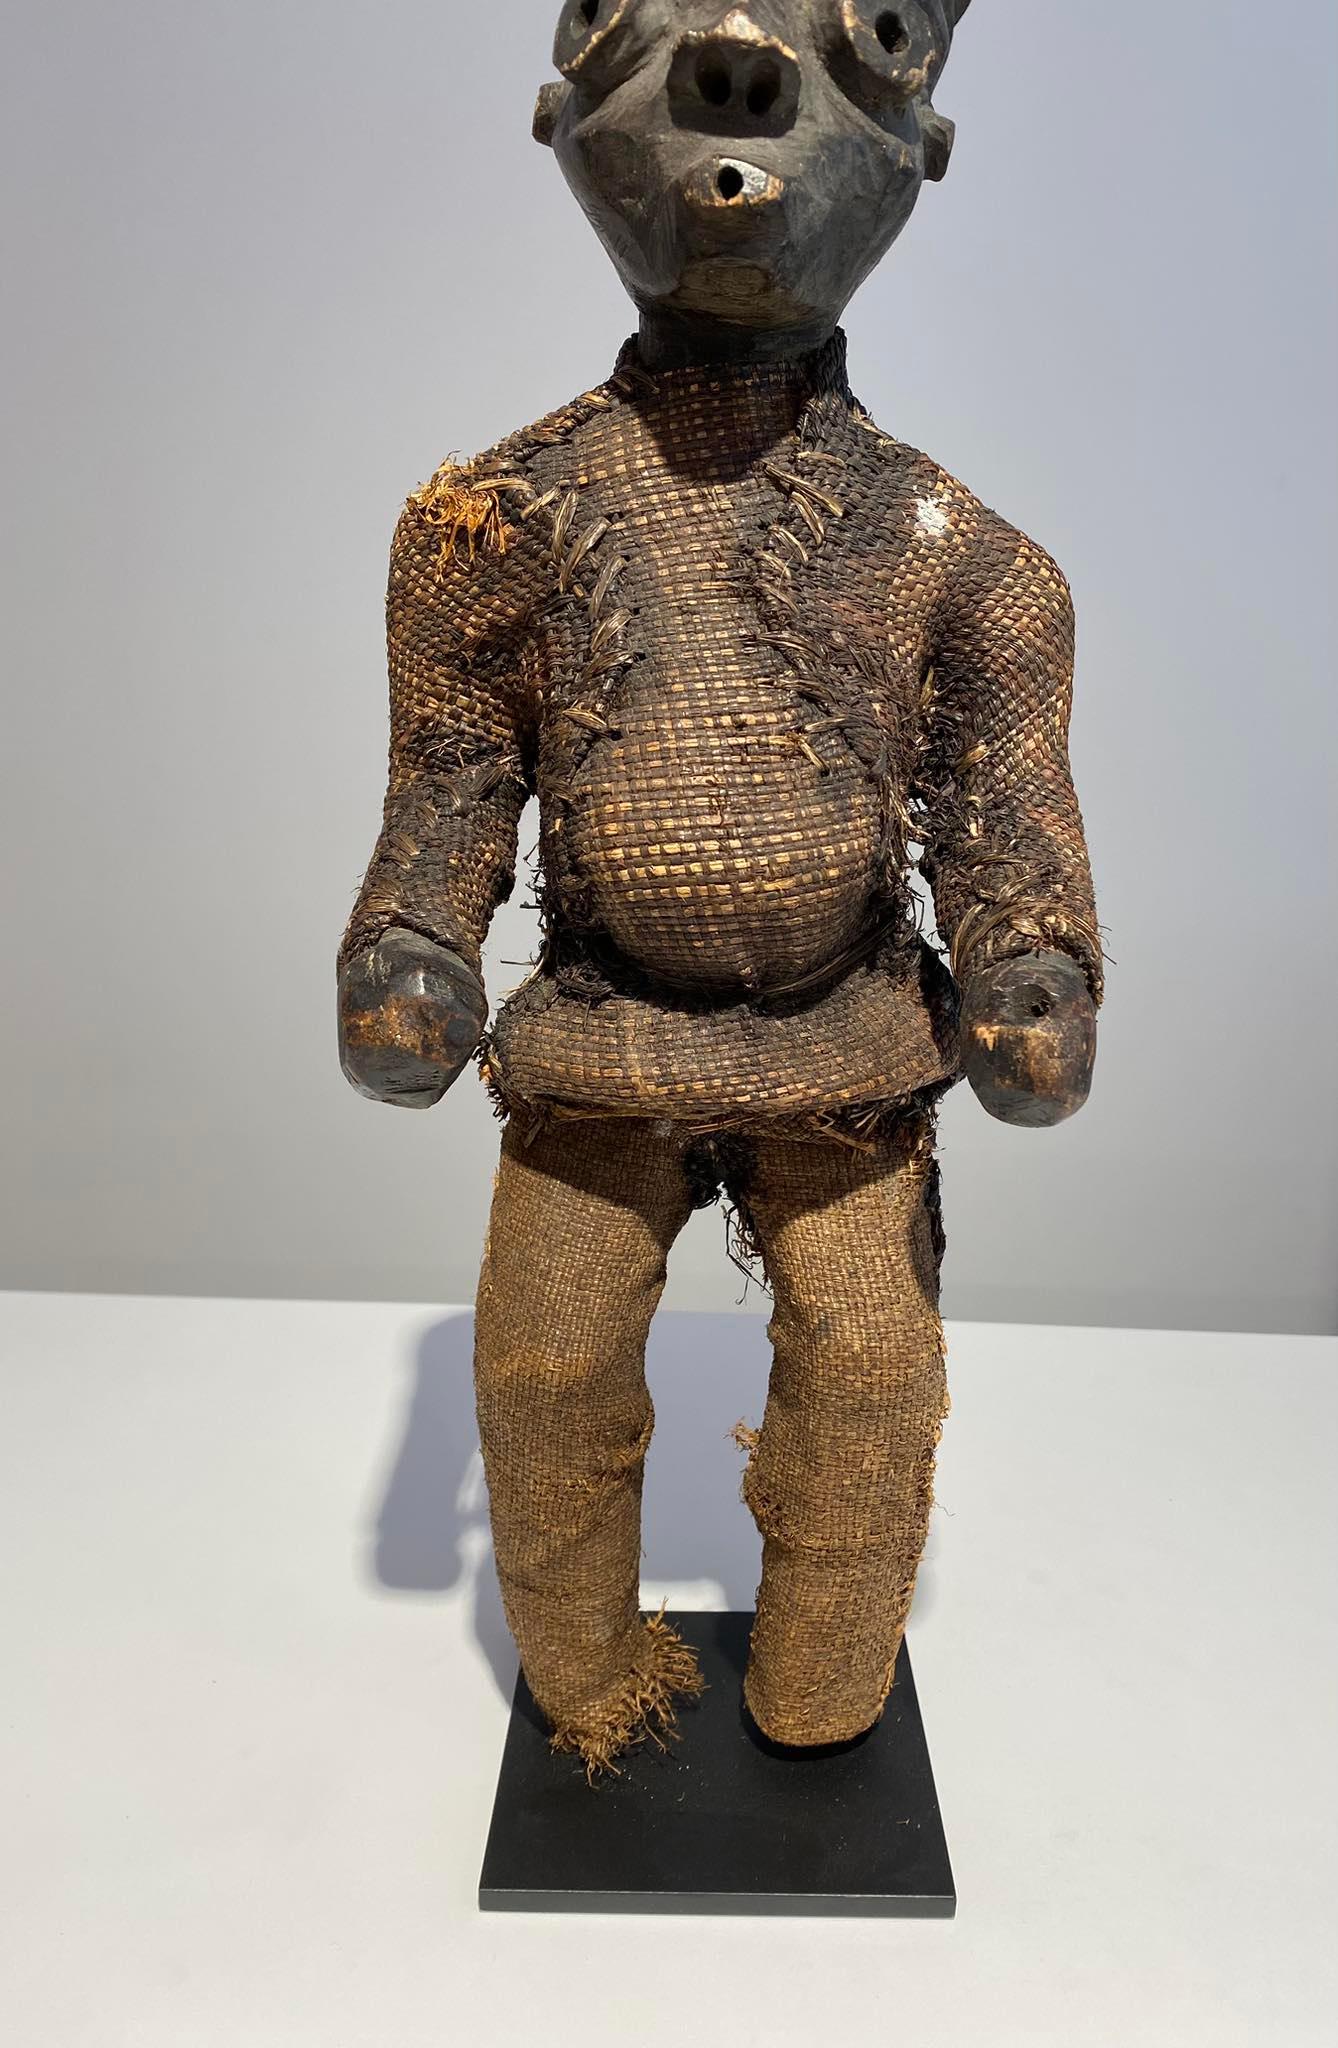 Wooden Pende Antropomorphic Statue Congo Region Kasaï -19th century African Art In Good Condition For Sale In Leuven, BE